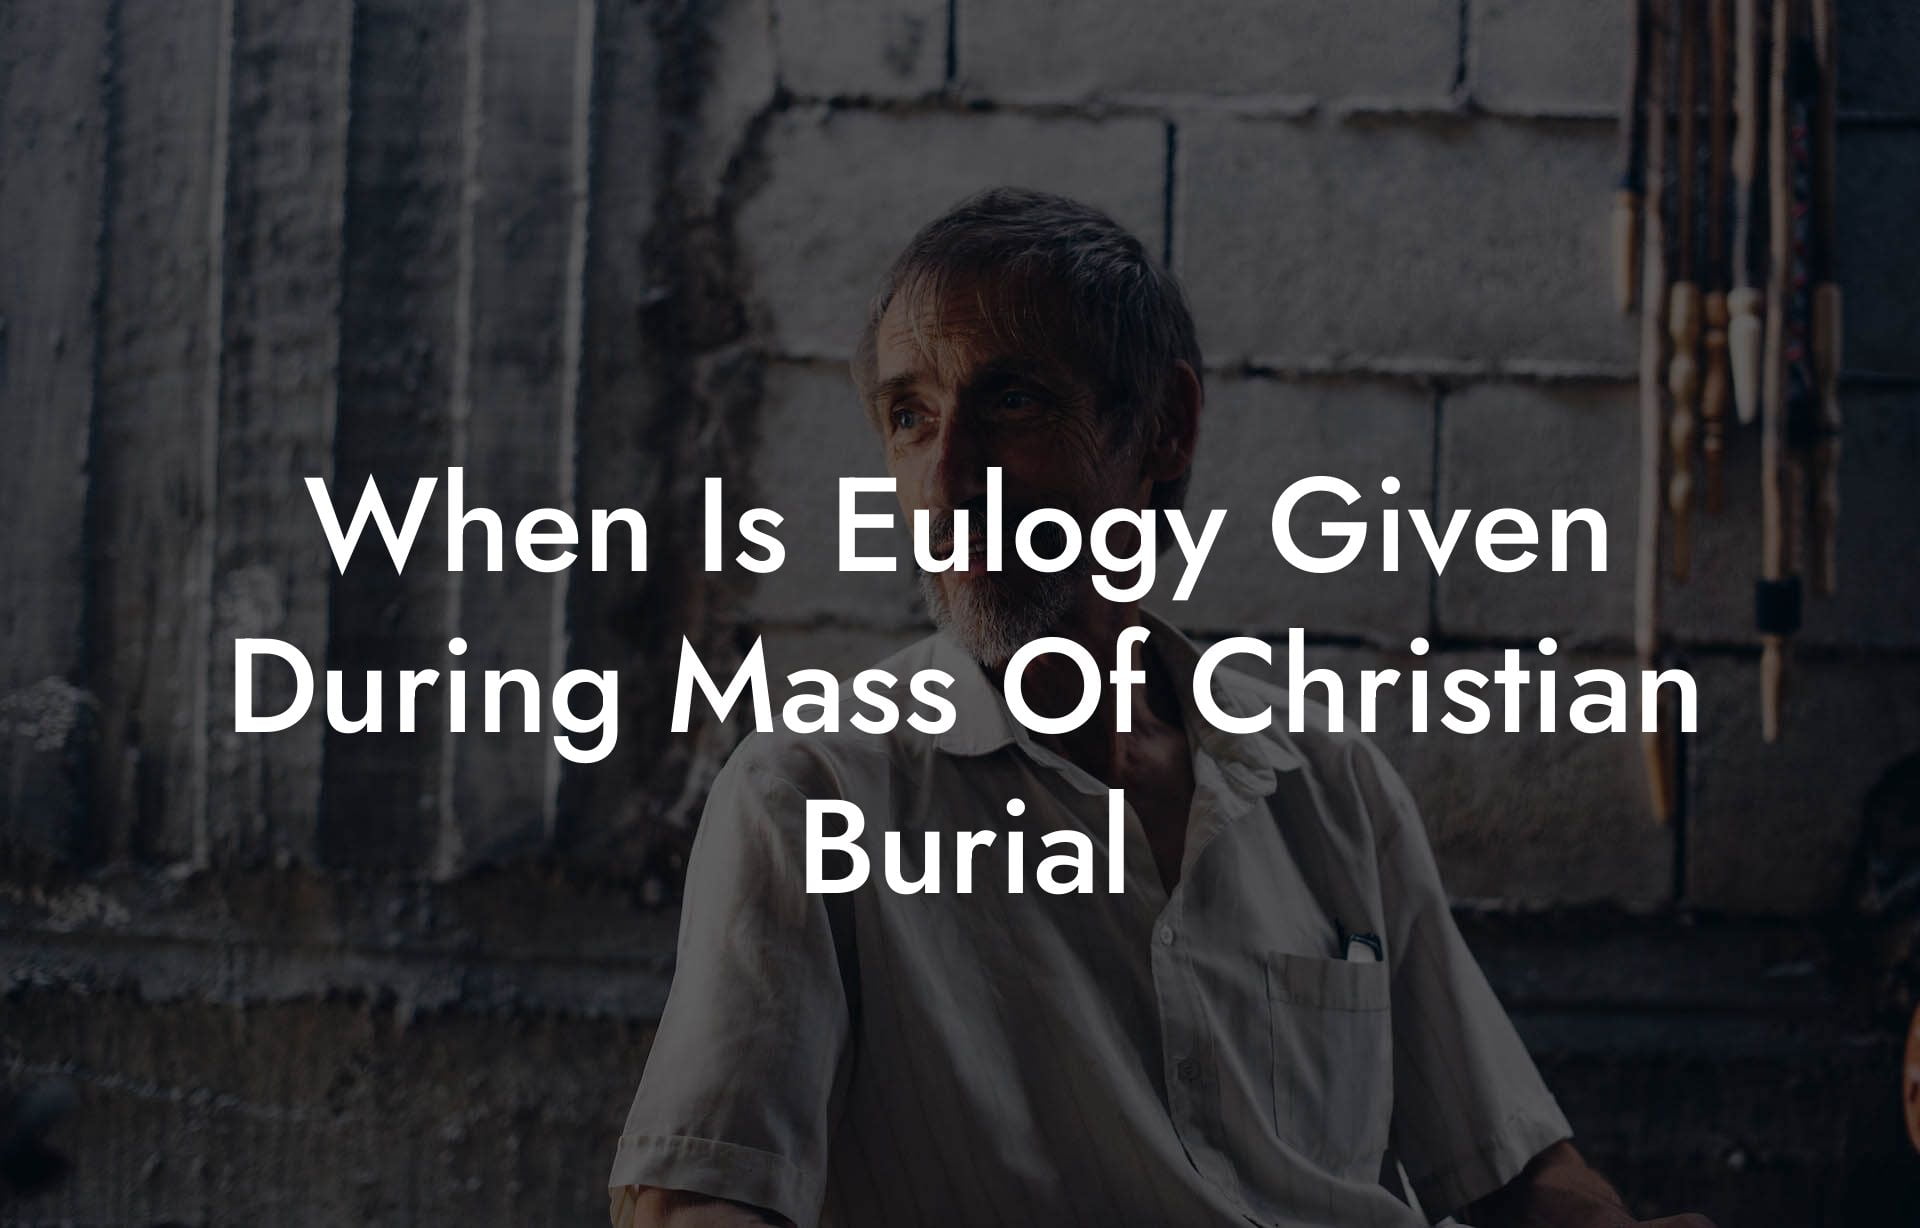 When Is Eulogy Given During Mass Of Christian Burial